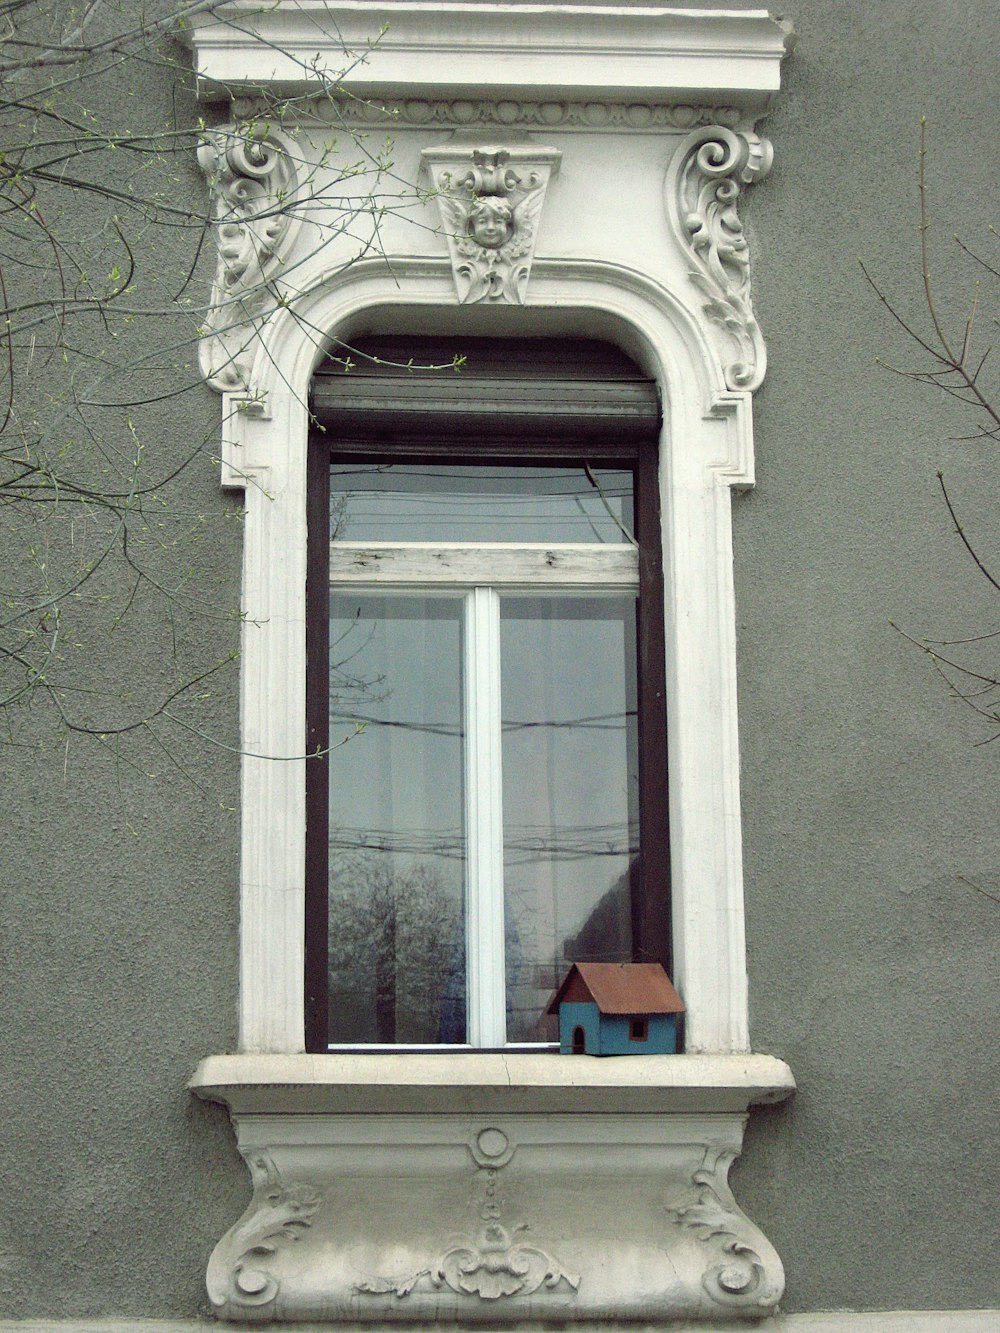 a window with a bird house in the window